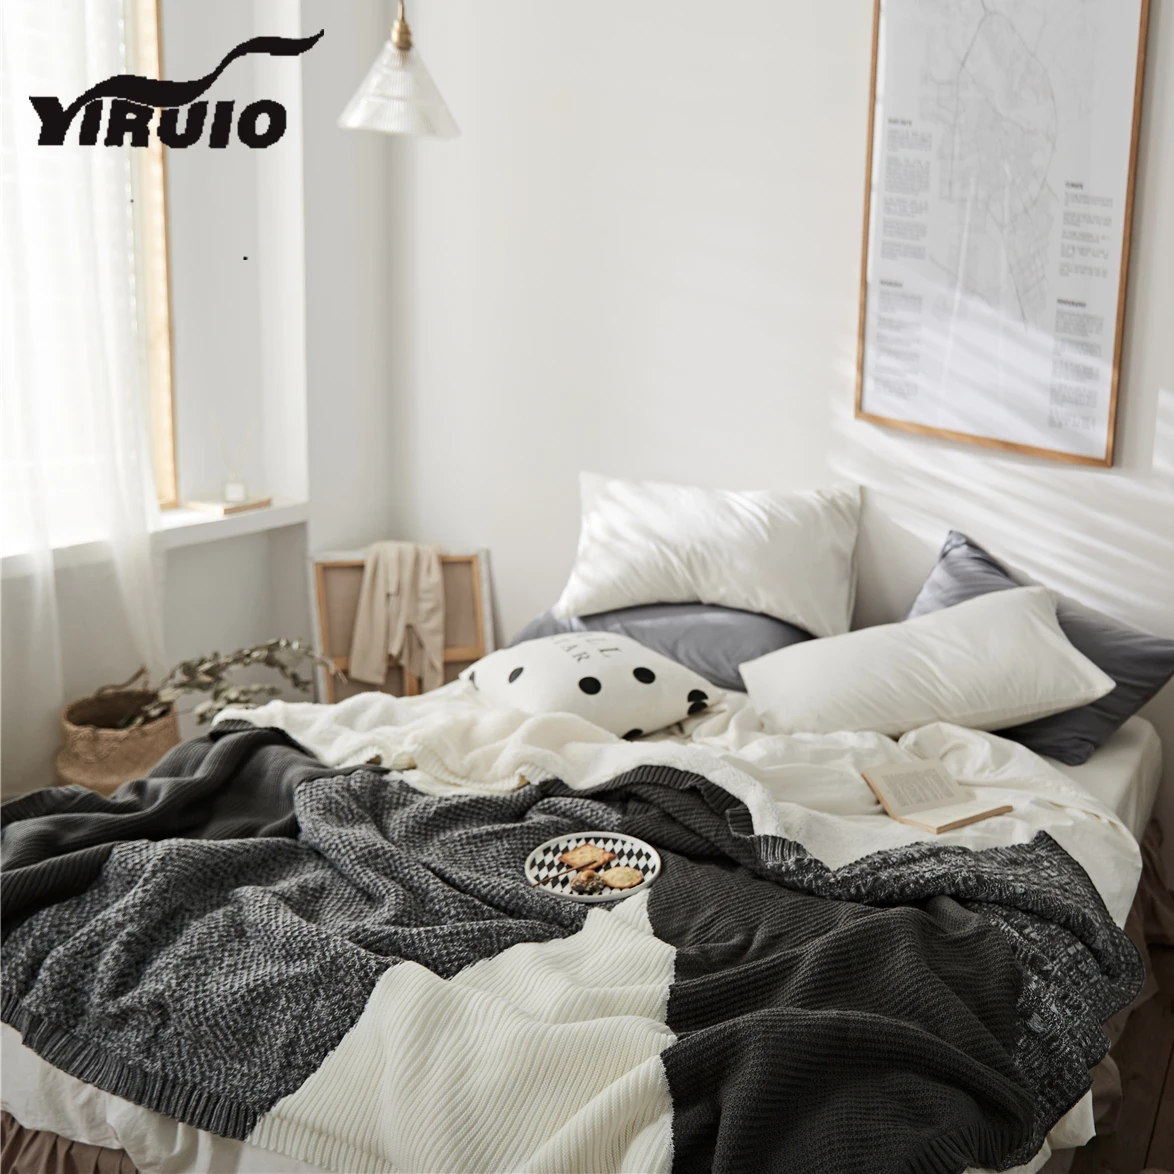 YIRUIO Elegant Knitted Color Plaid Blanket Winter Warm Breathable Thick Fluffy Sherpa Blanket Decorative Bedspread Quilt Blanket